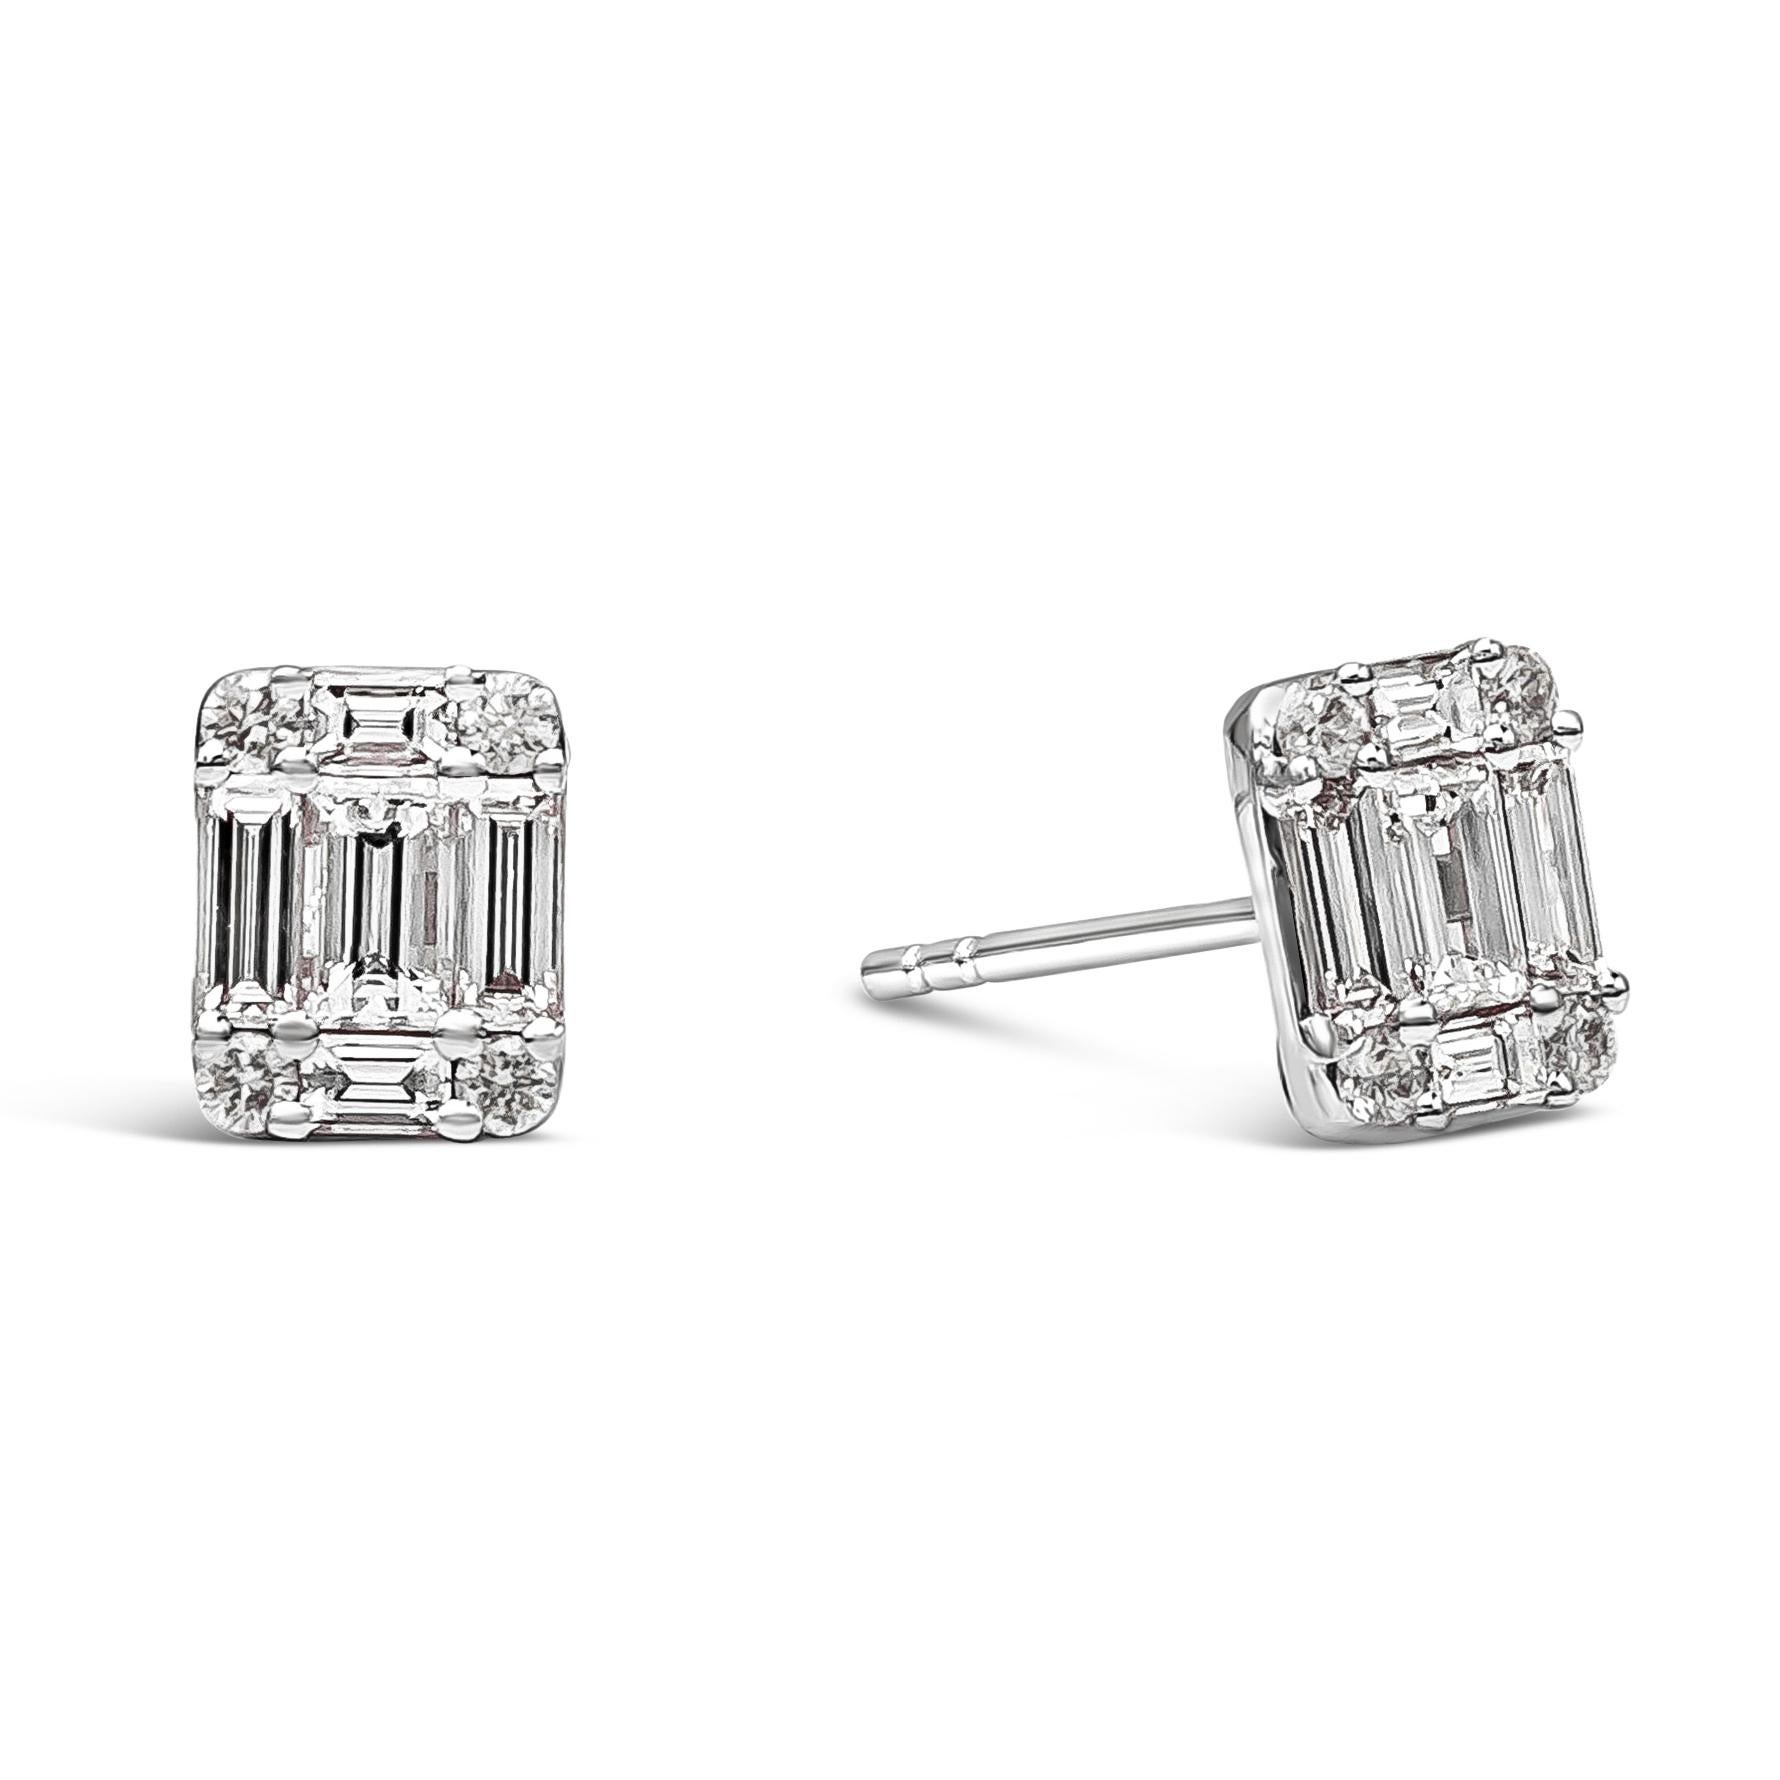 A beautiful illusion stud earrings, showcasing a cluster of baguette and round diamonds, set in an emerald cut design. Diamonds weigh 0.94 carats total with F color and VS clarity. Made with 18K white gold.

Roman Malakov is a custom house,